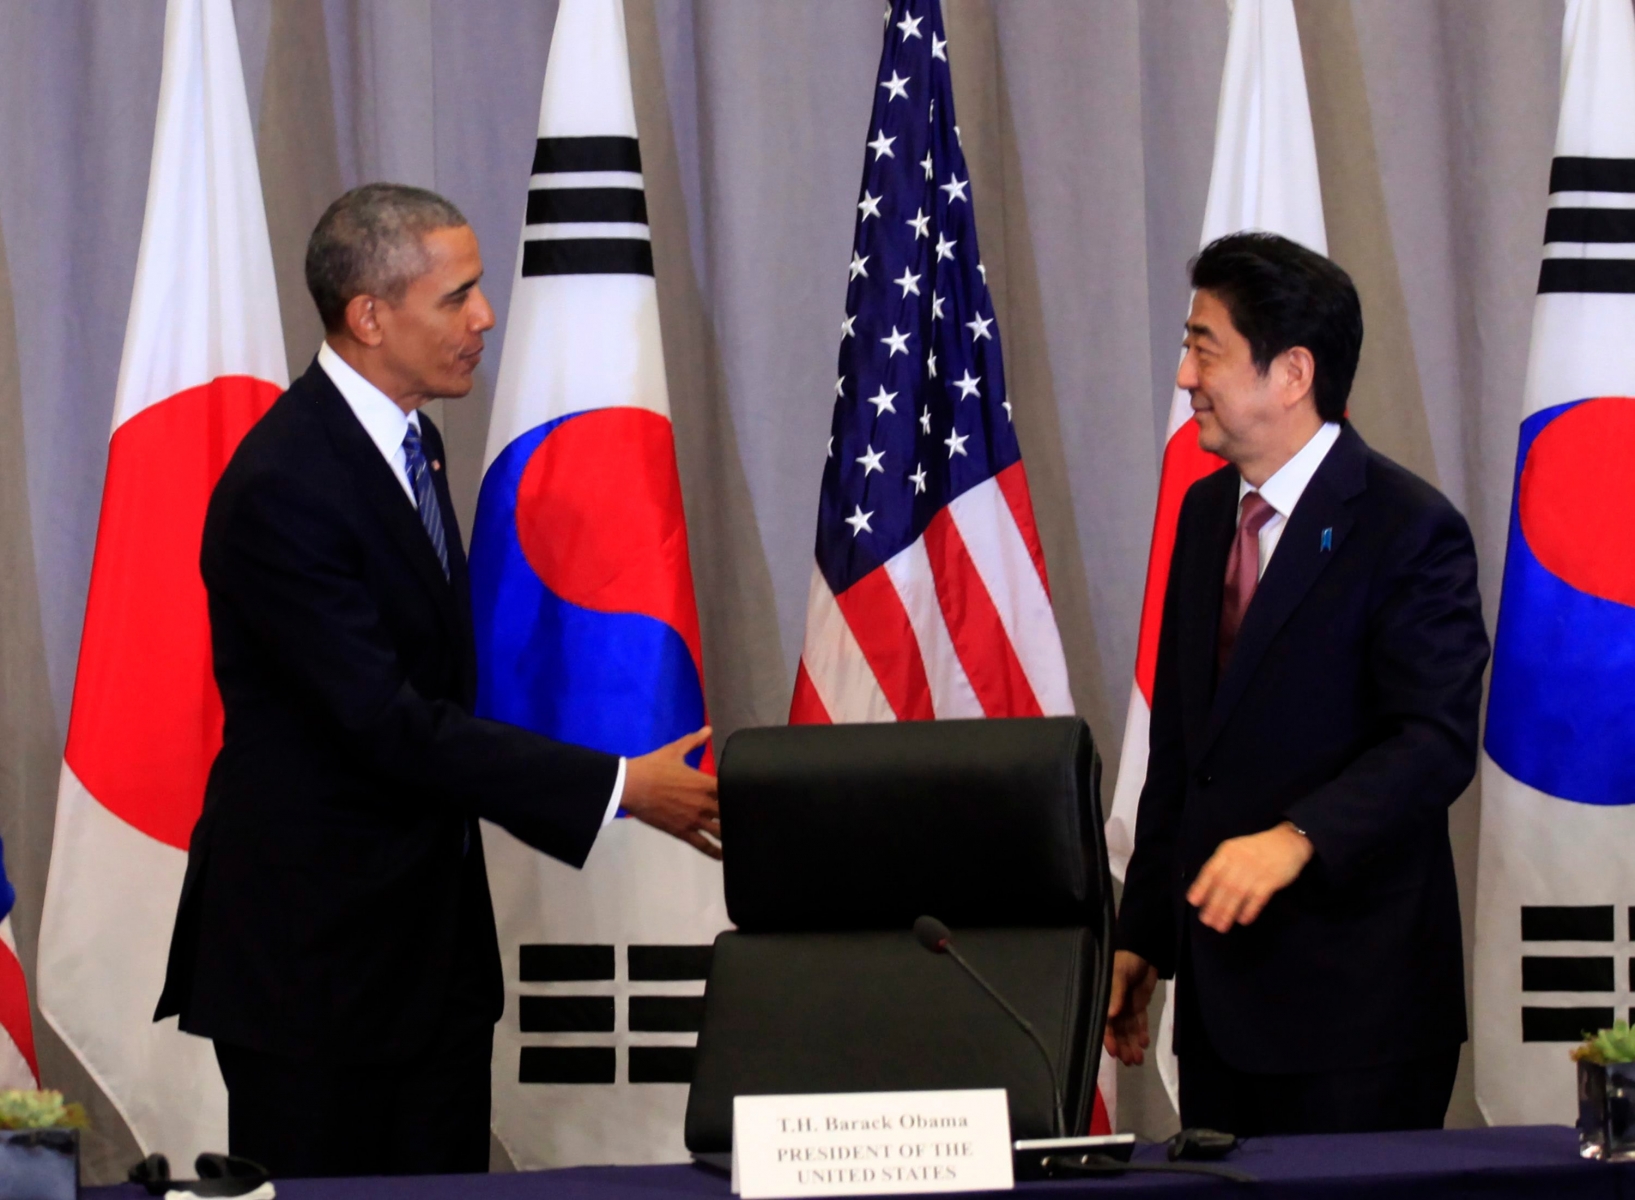 epa05237872 US President Barack Obama (L) attends a trilateral meeting with President Park Geun-Hye (not pictured) of the Republic of Korea and Prime Minister Shinzo Abe (R) of Japan at the Nuclear Security Summit in Washington, DC, USA, on 31 March 2016. World leaders and their delegations are converging on Washington, DC, for the 2016 Nuclear Security Summit, which takes place 31 March - 01 April.  EPA/Dennis Brack / POOL USA NUCLEAR SECURITY SUMMIT PROTEST